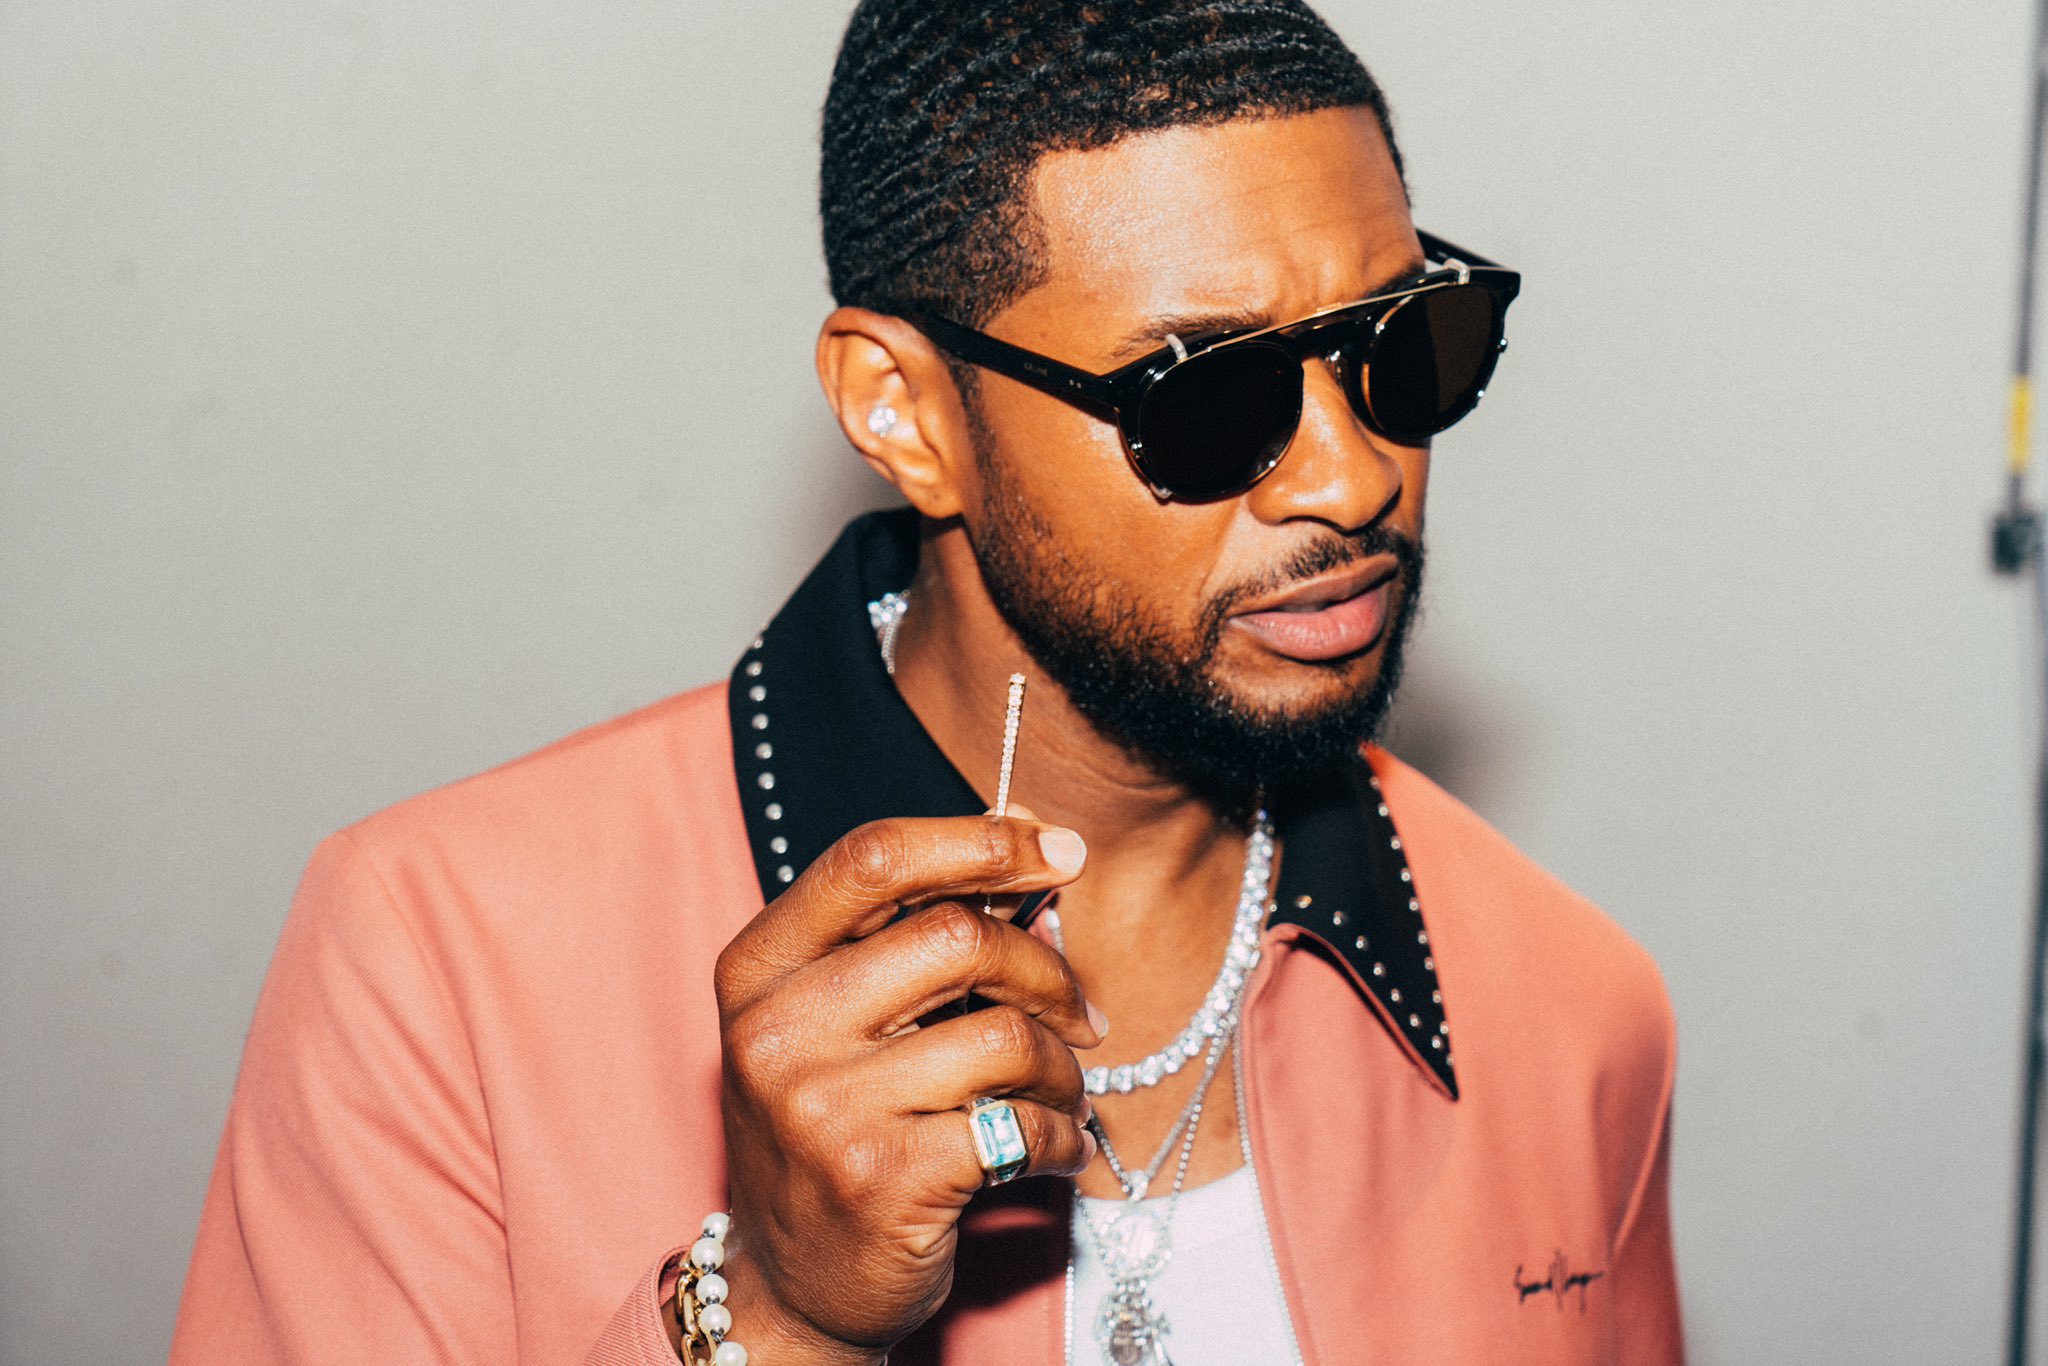 Usher announces new dates for 2023 Las Vegas residency: All you need to know